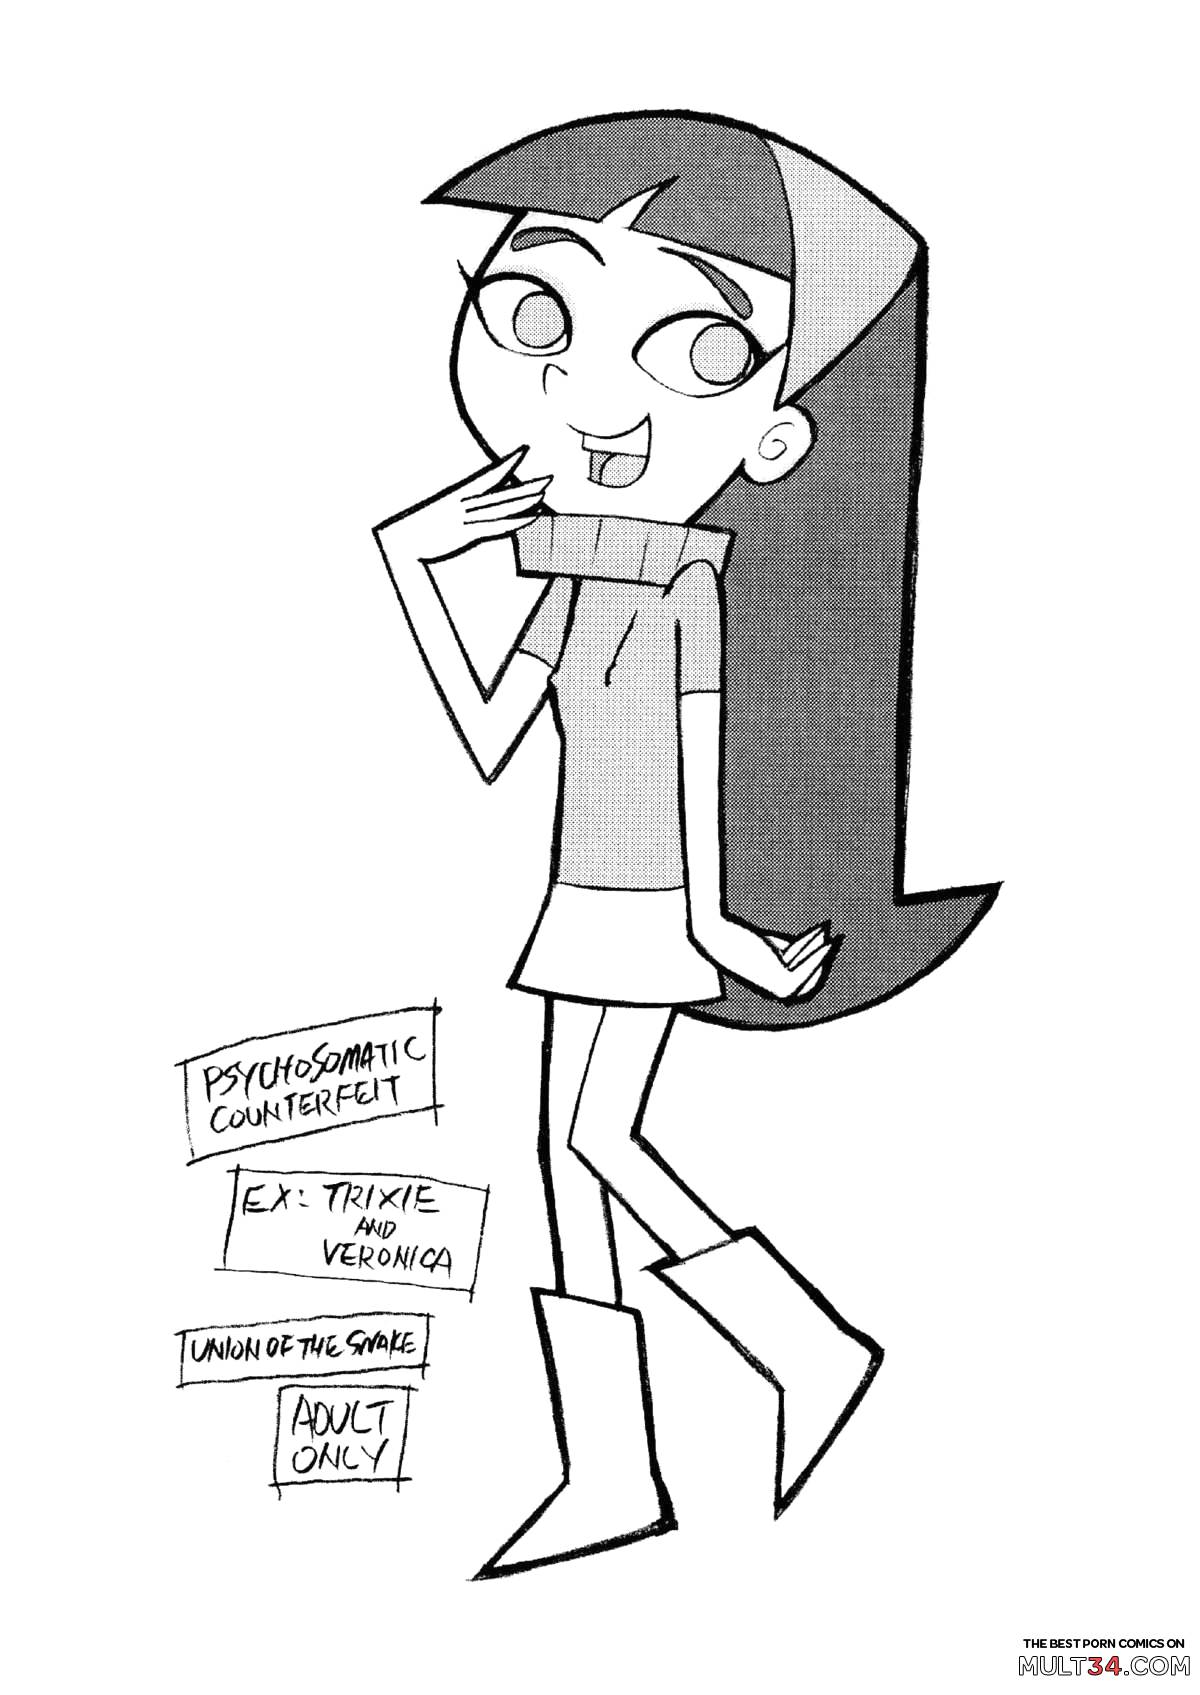 The Fairly Oddparents Trixie Veronica - Psychosomatic Counterfeit Ex Trixie & Veronica hentai manga for free |  MULT34